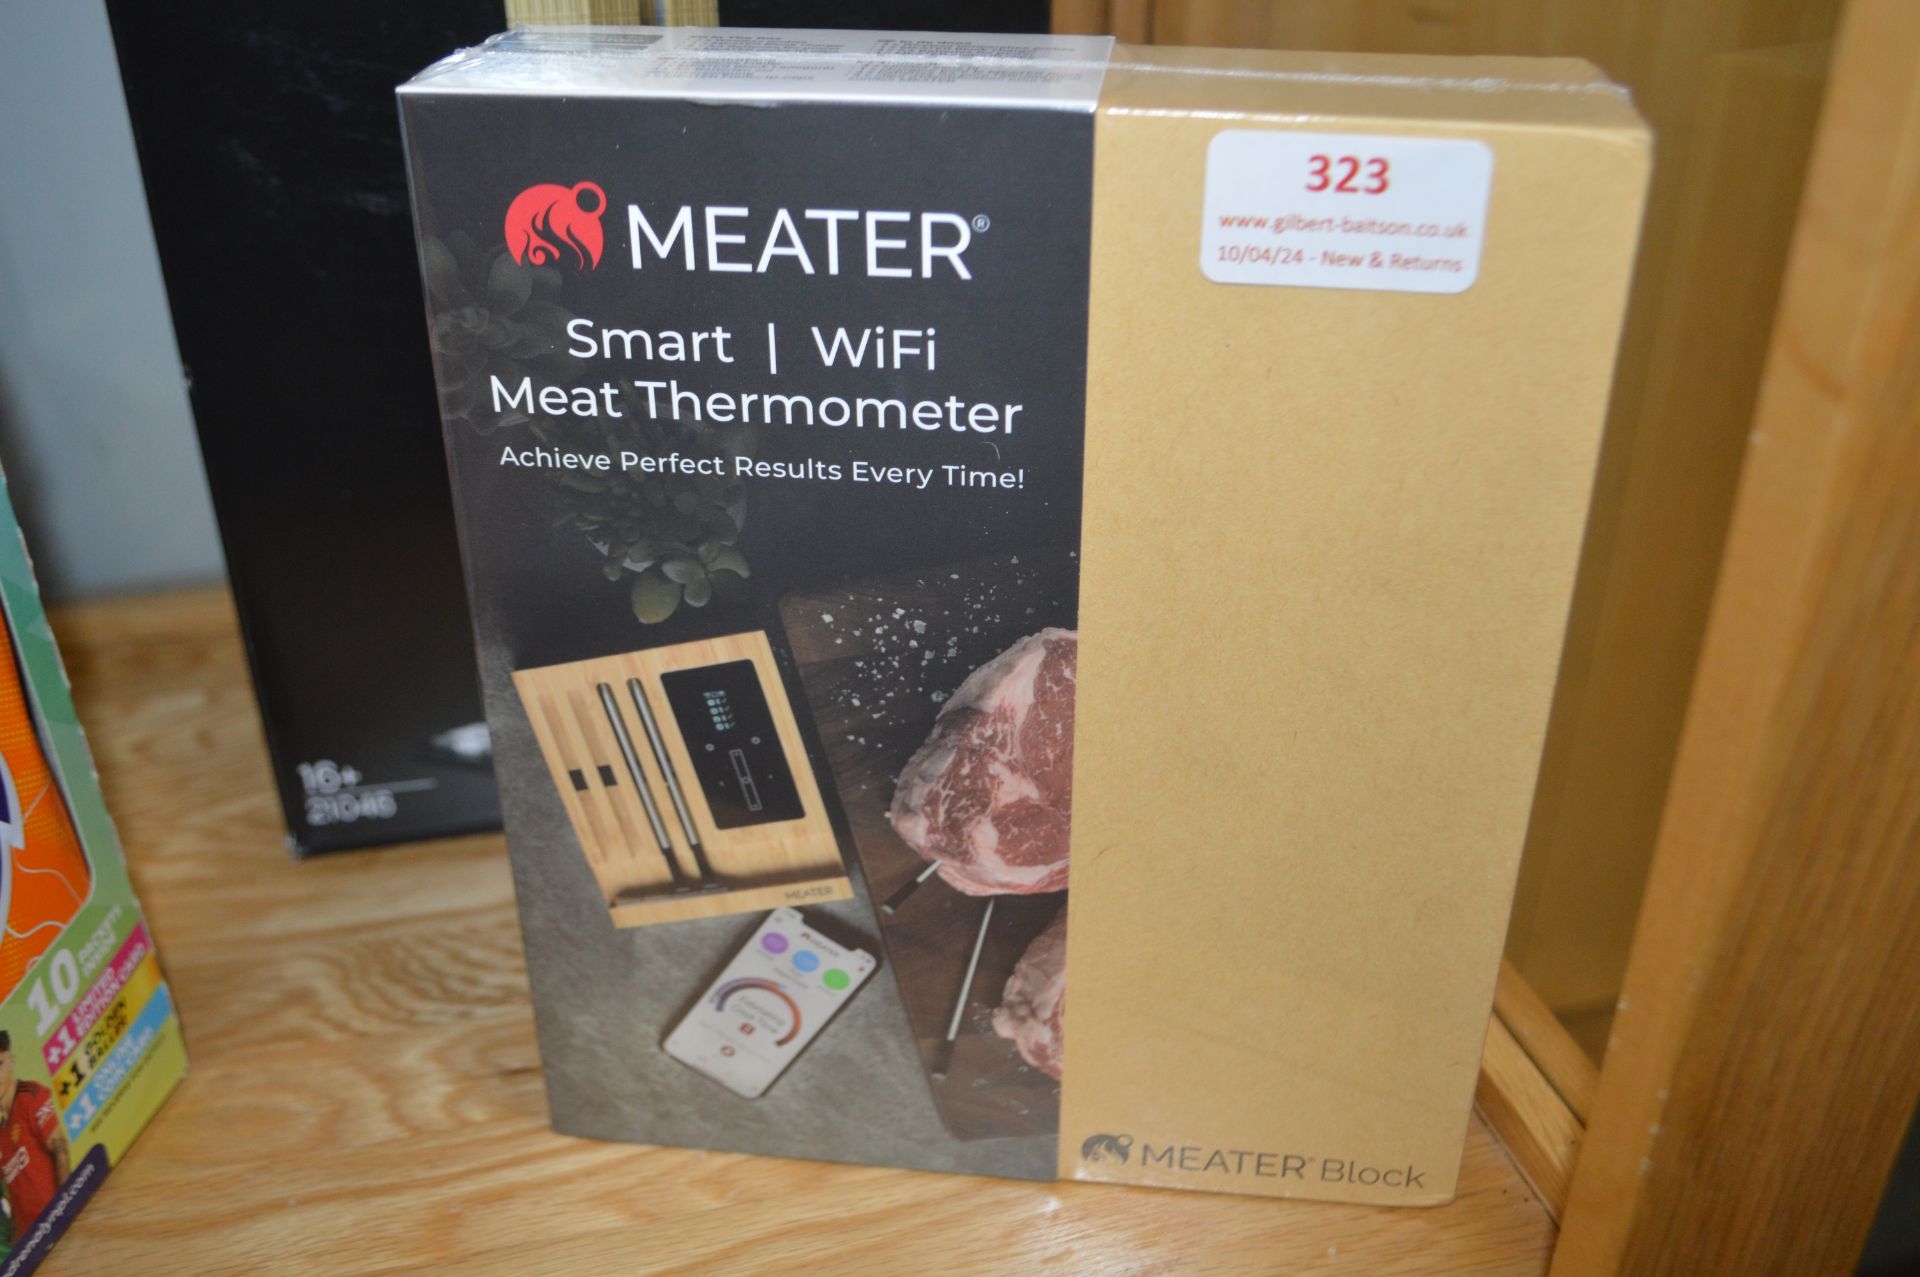 *Meater Smart Wi Fi Meat Thermometer